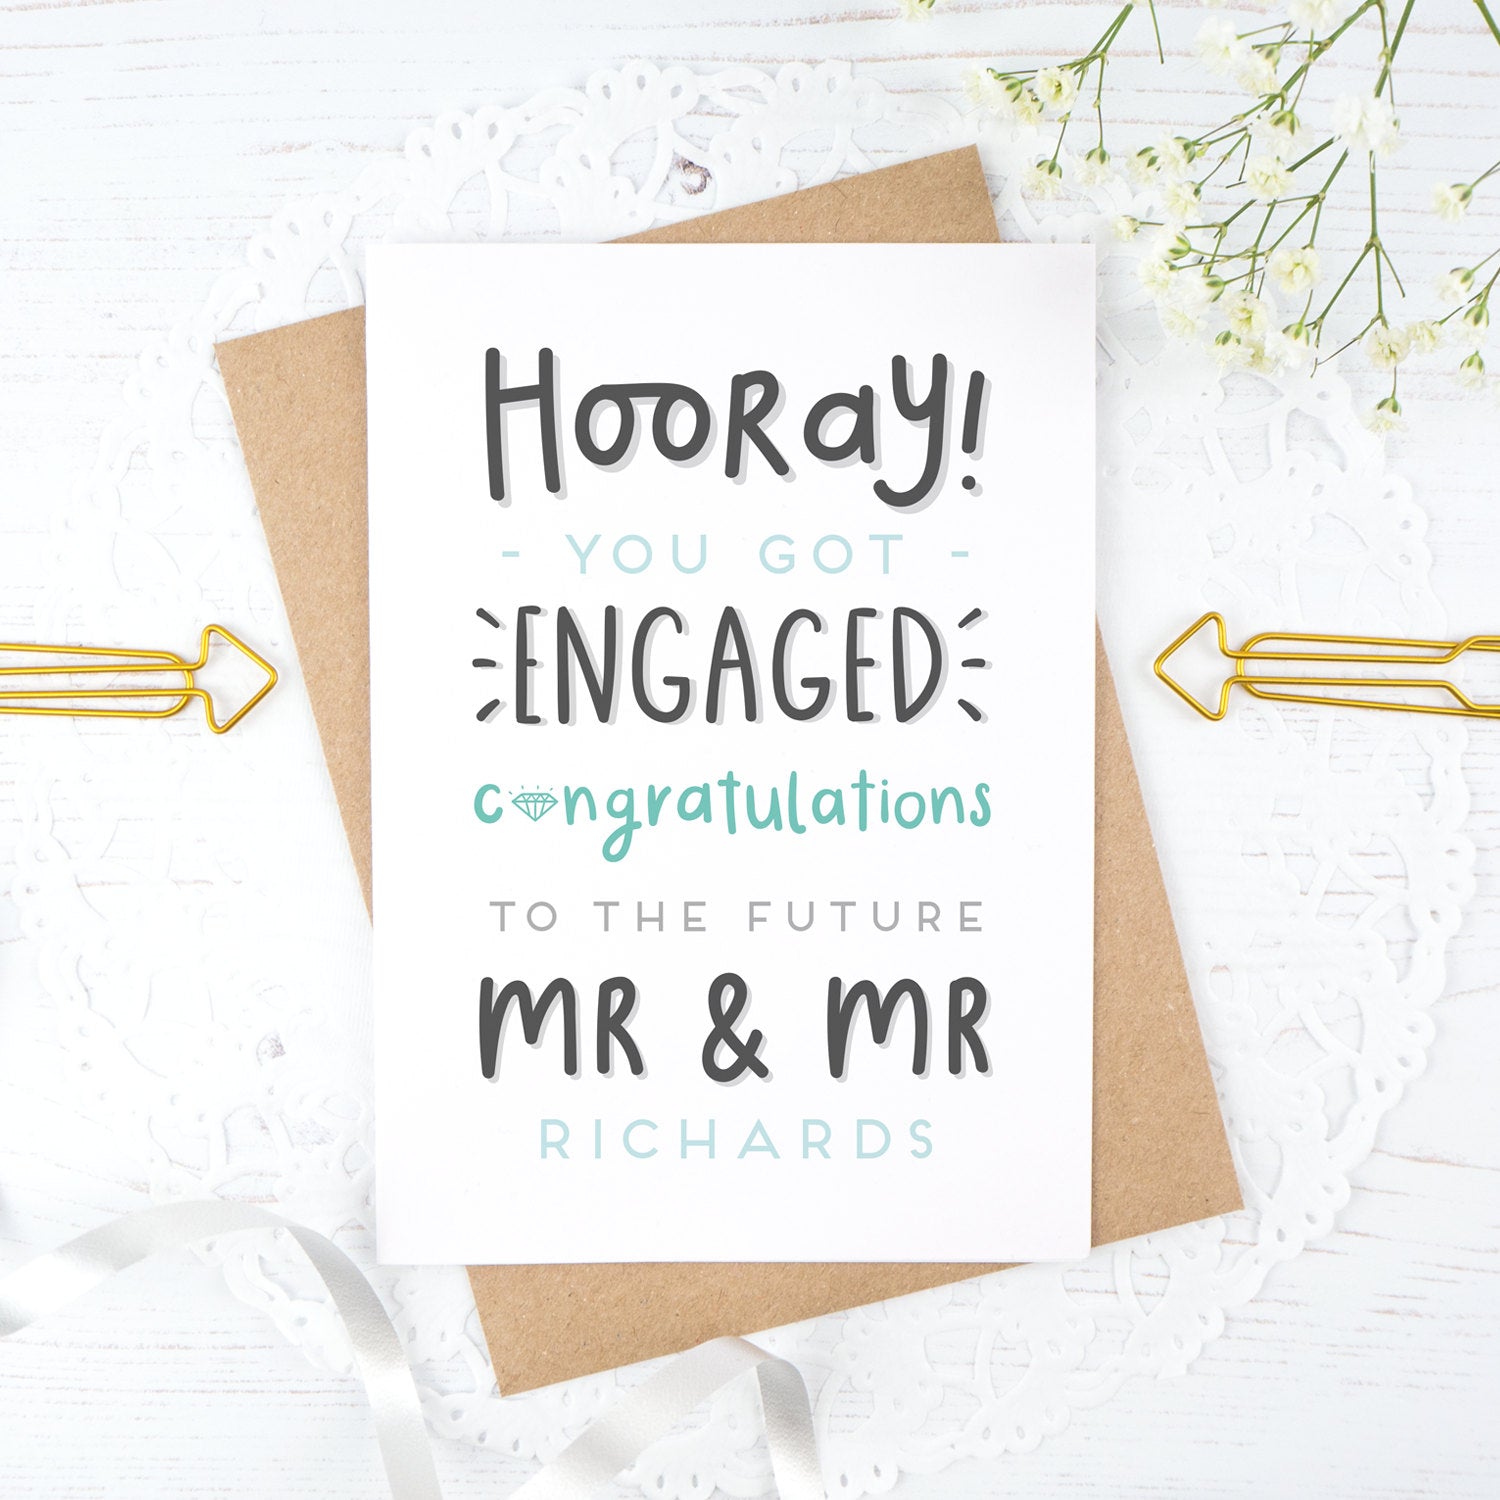 Hooray you got engaged! - Personalised Mr & Mr engagement card in blue